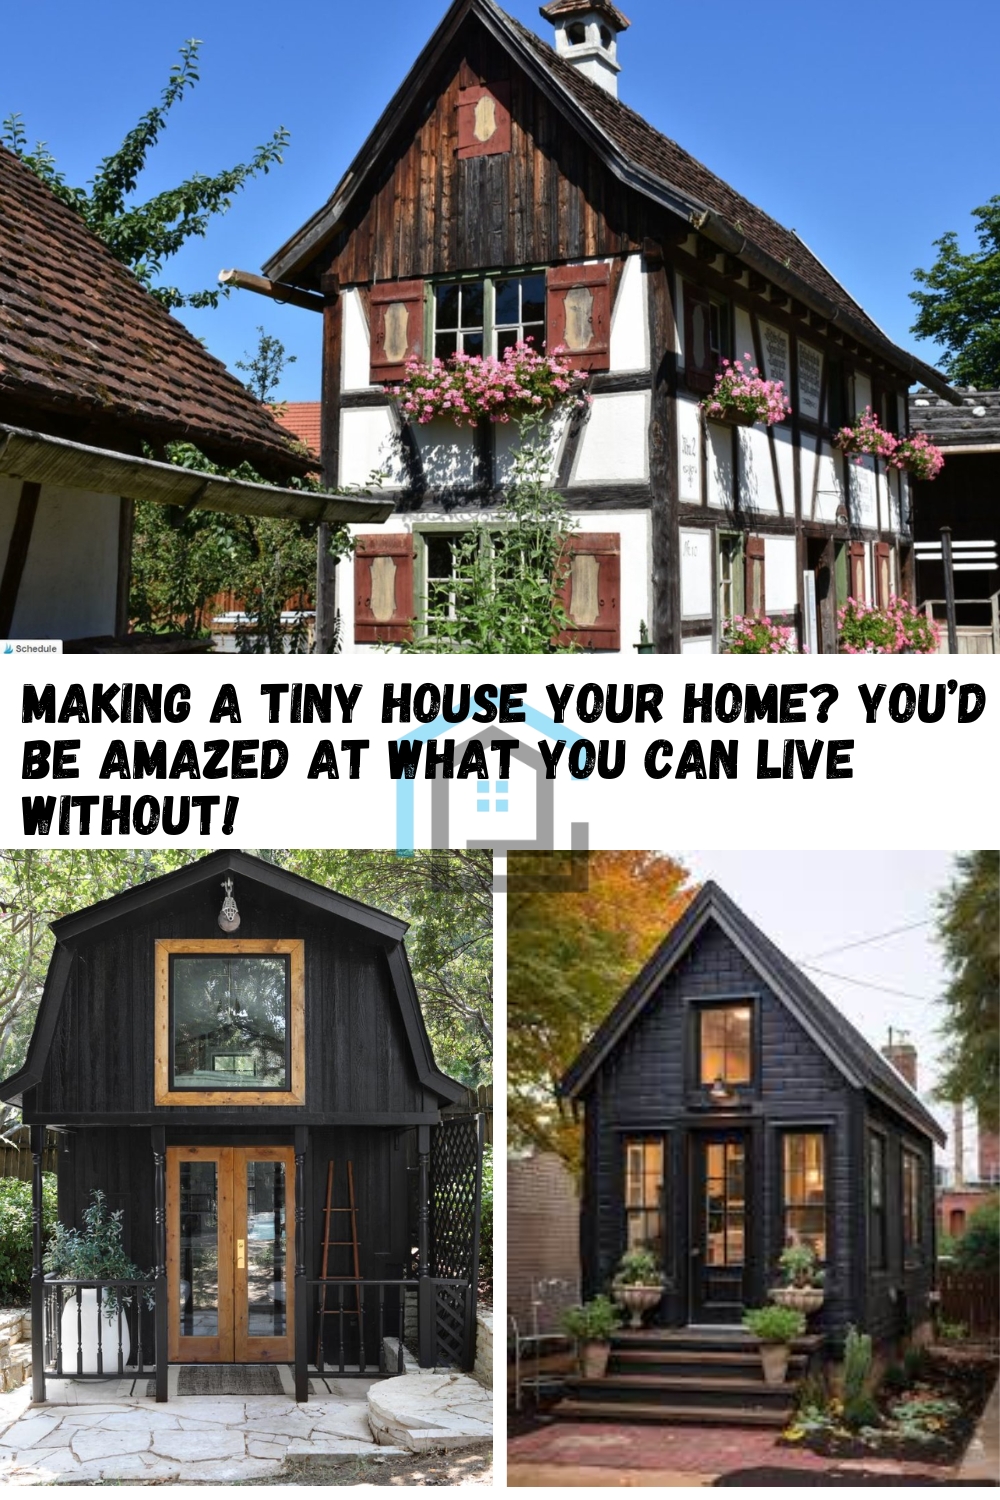 Making A Tiny House Your Home? You’d Be Amazed At What You Can Live Without! pin